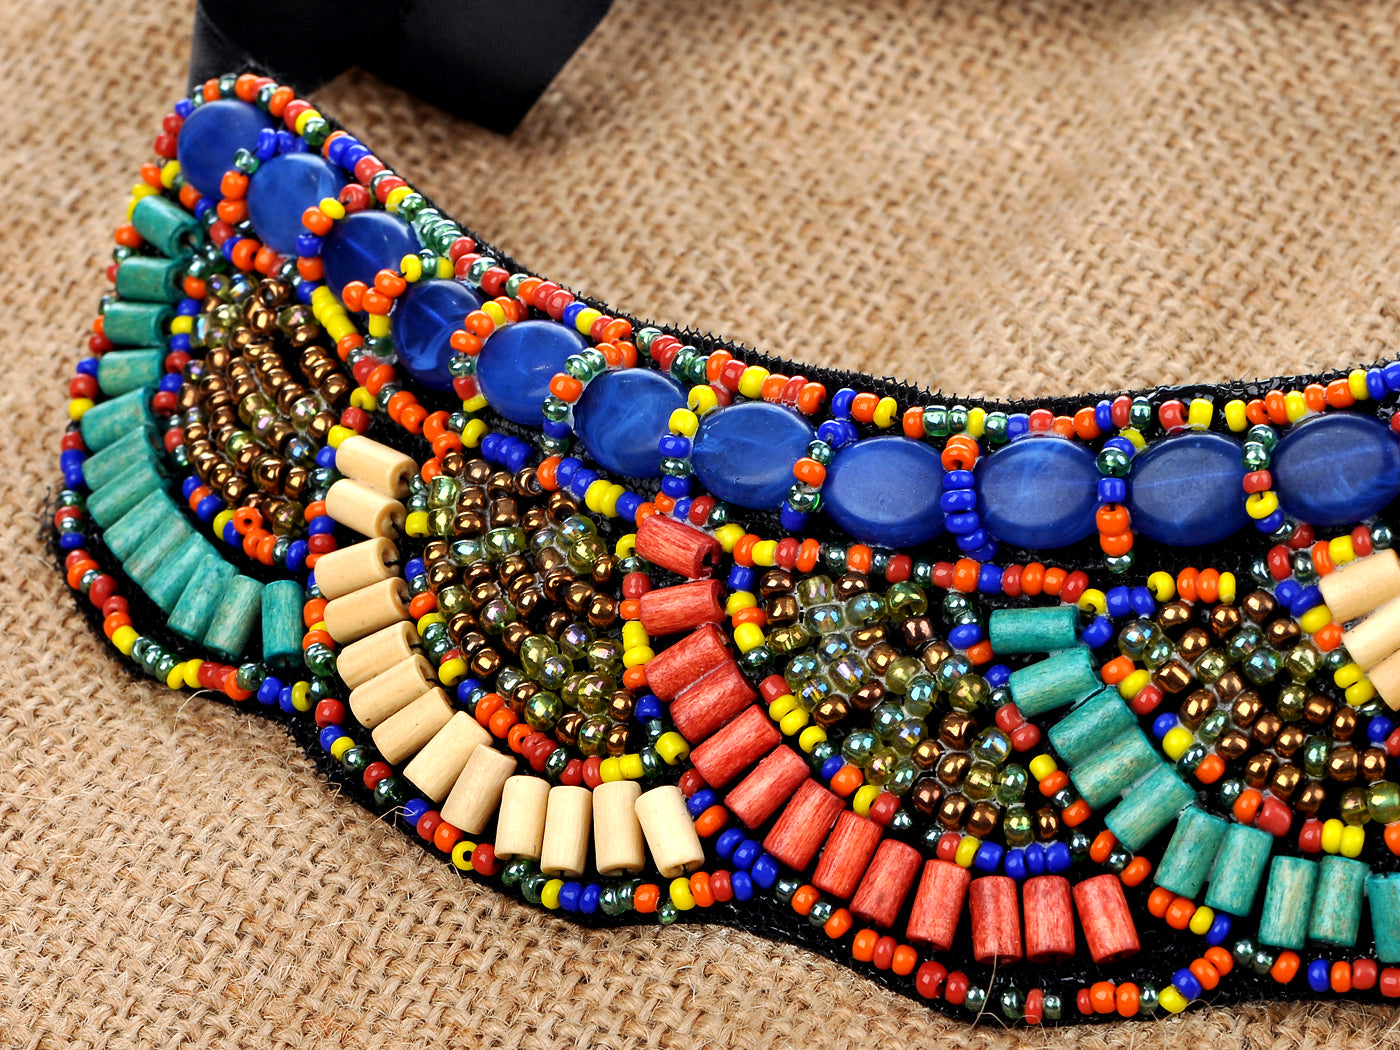 Tribal Colorful Beaded Bib Scallop Edge Statement Necklace